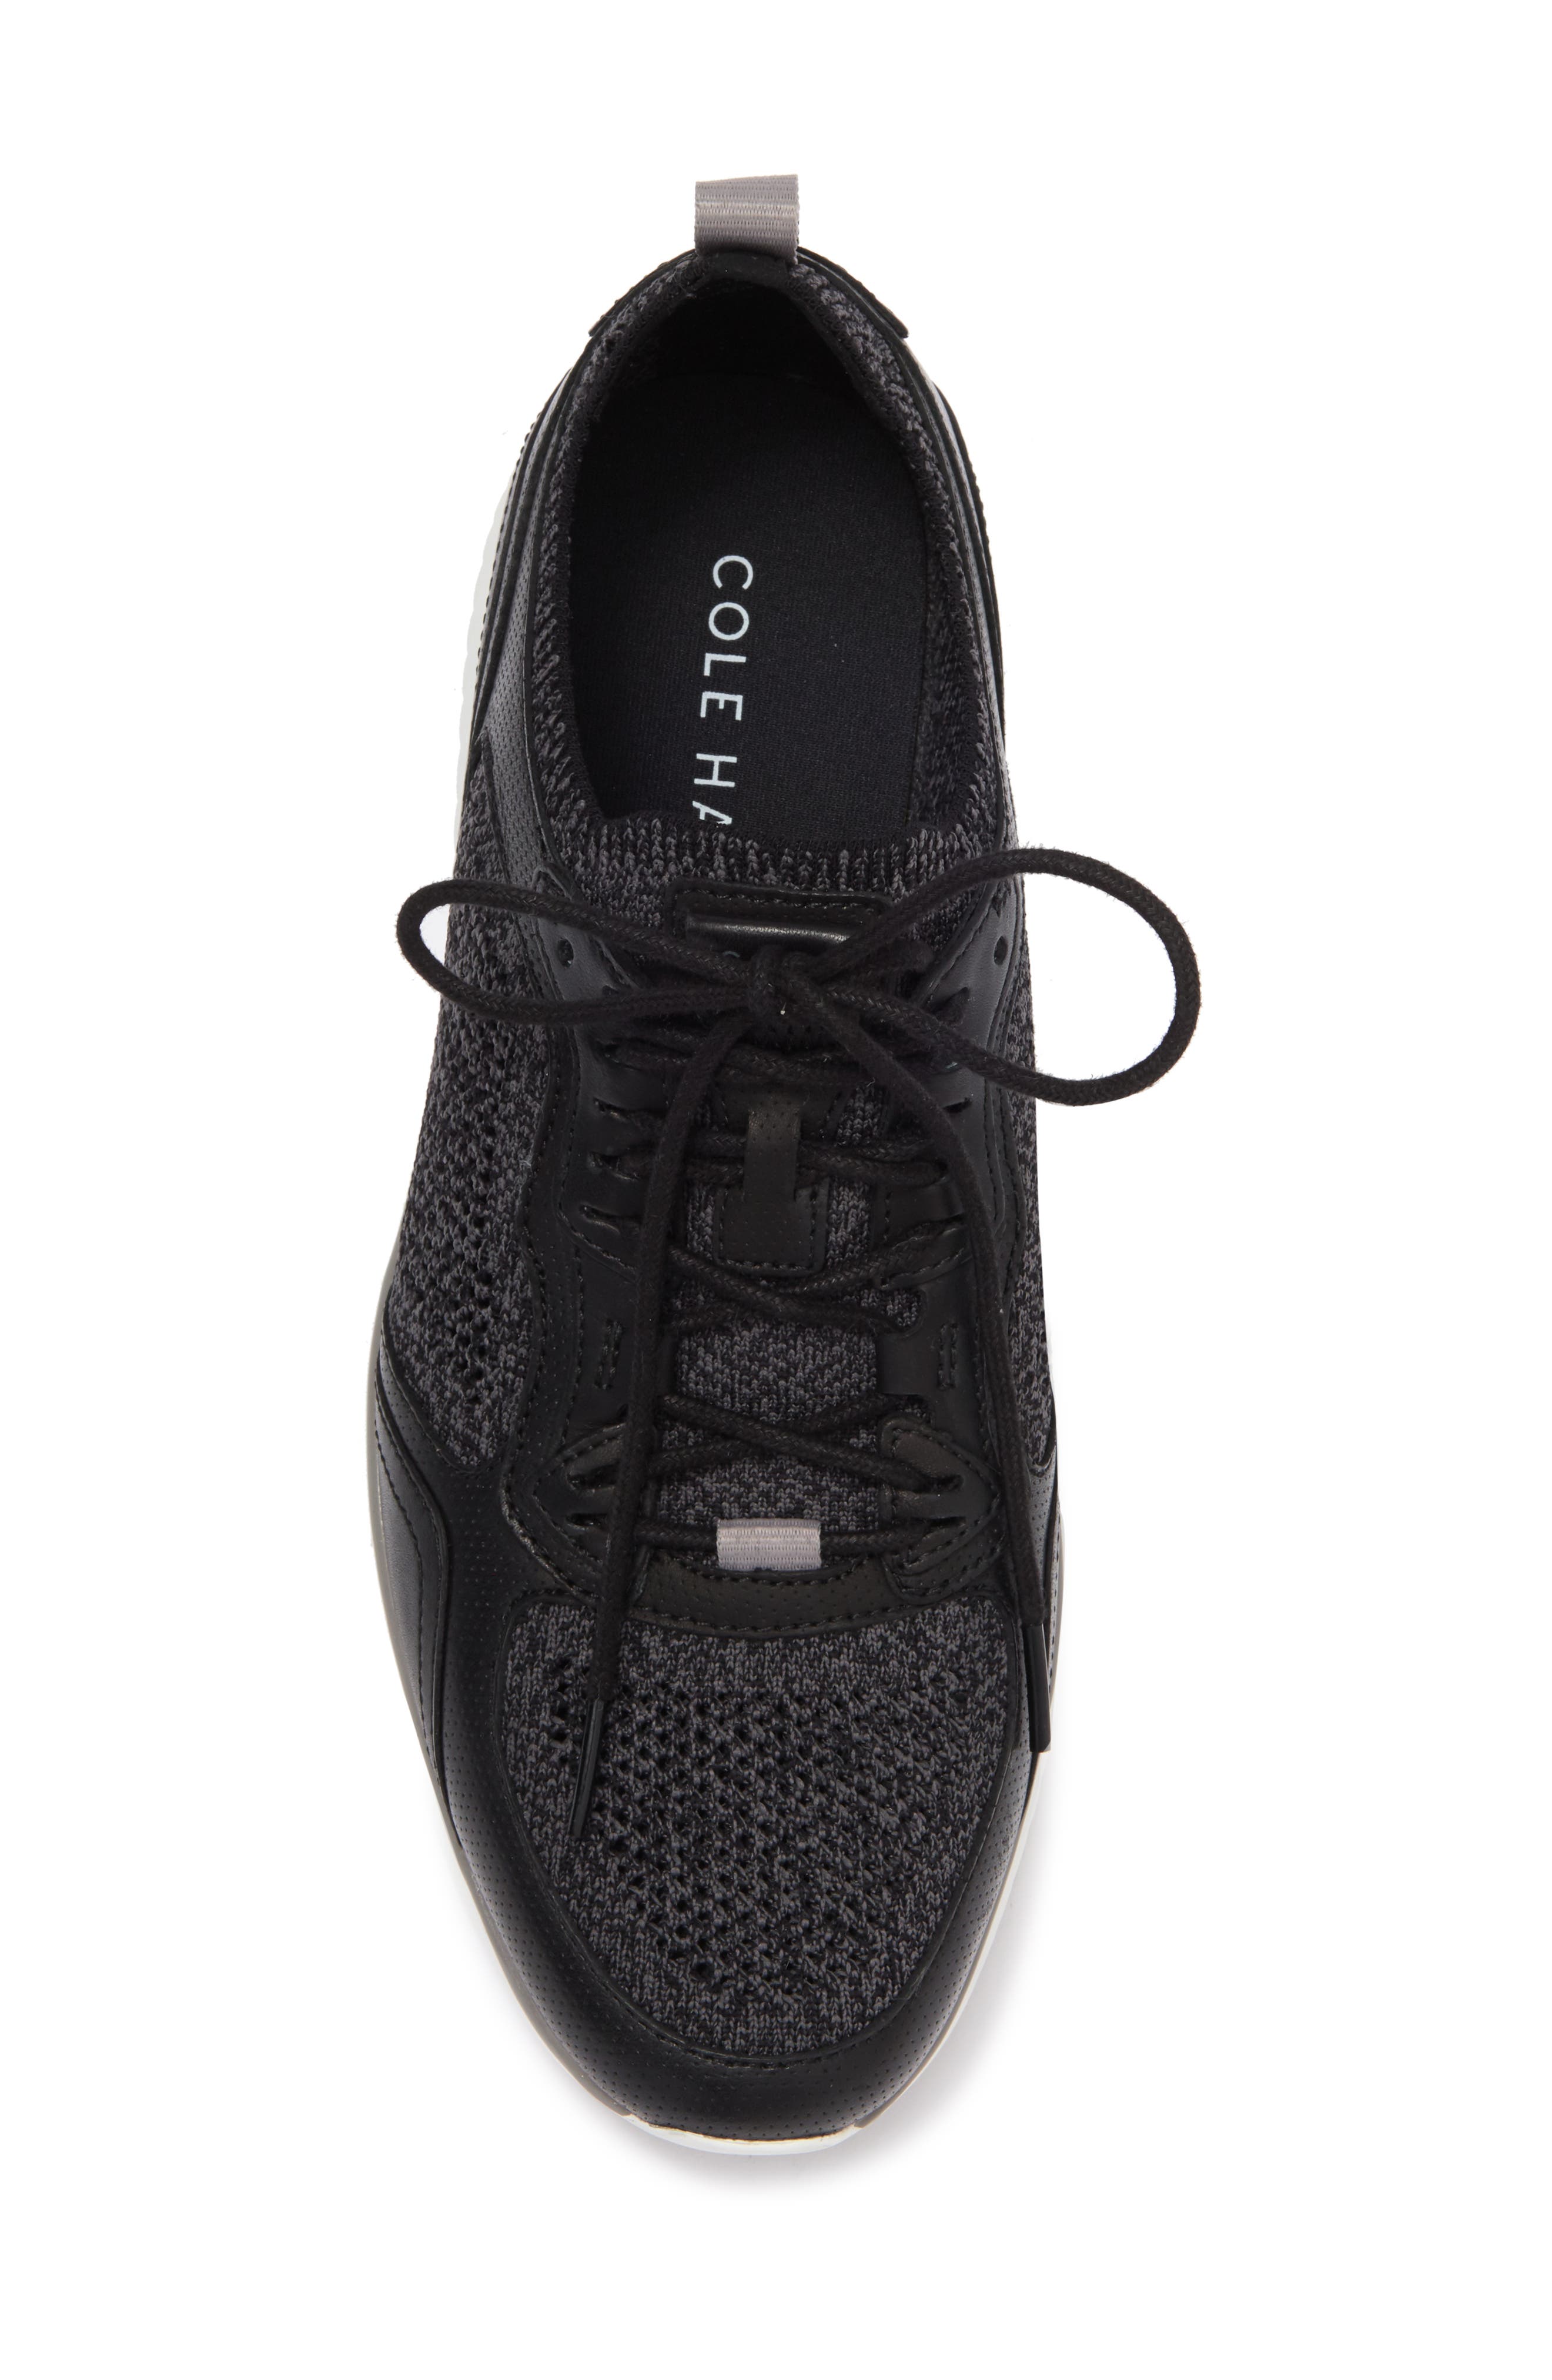 Cole Haan Grandmotion Crafted Sneaker In Black/opti